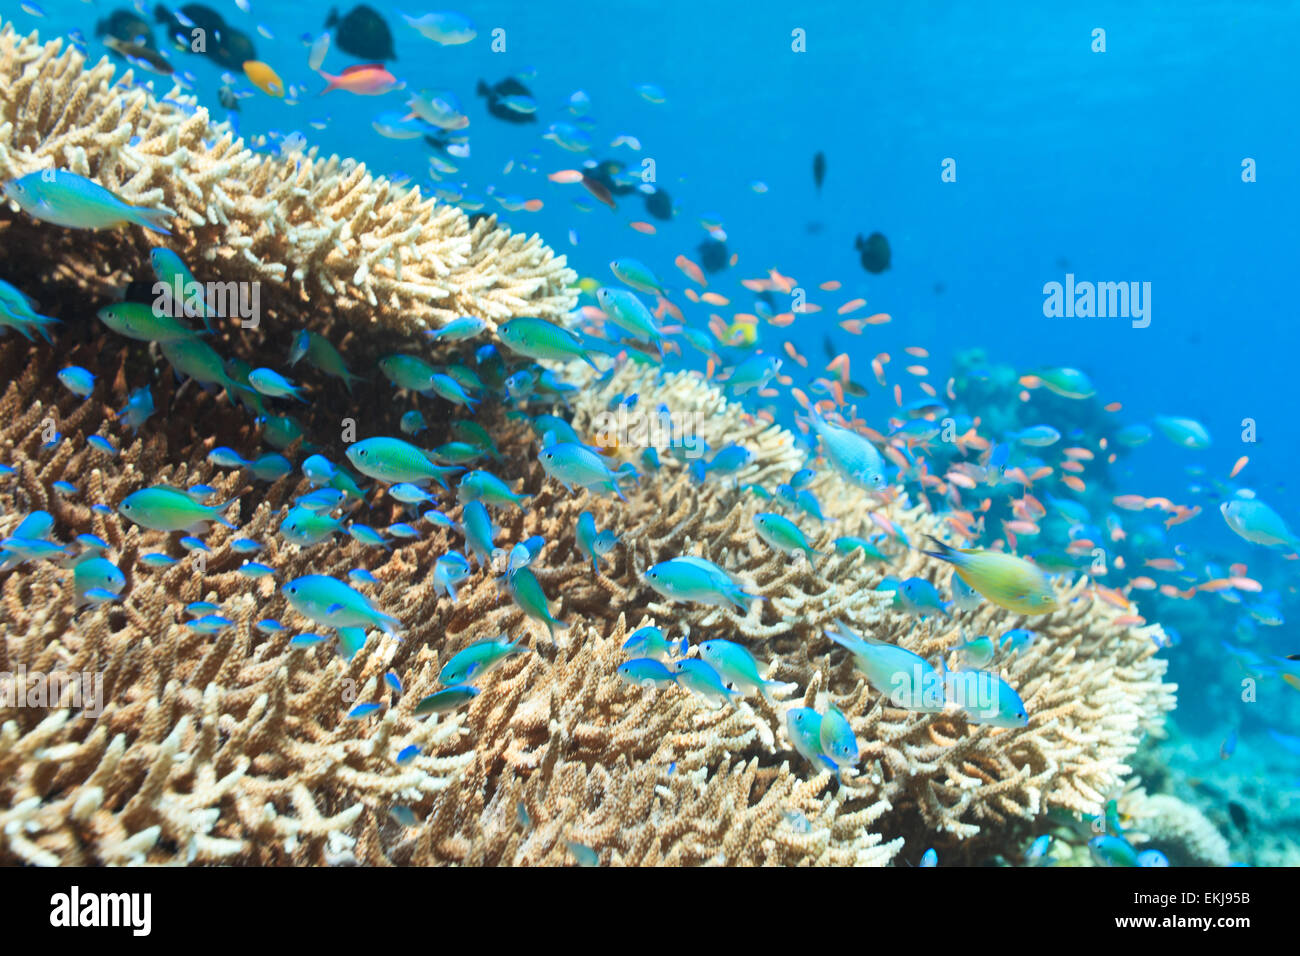 Beautiful view of the coral reef with fishes Stock Photo